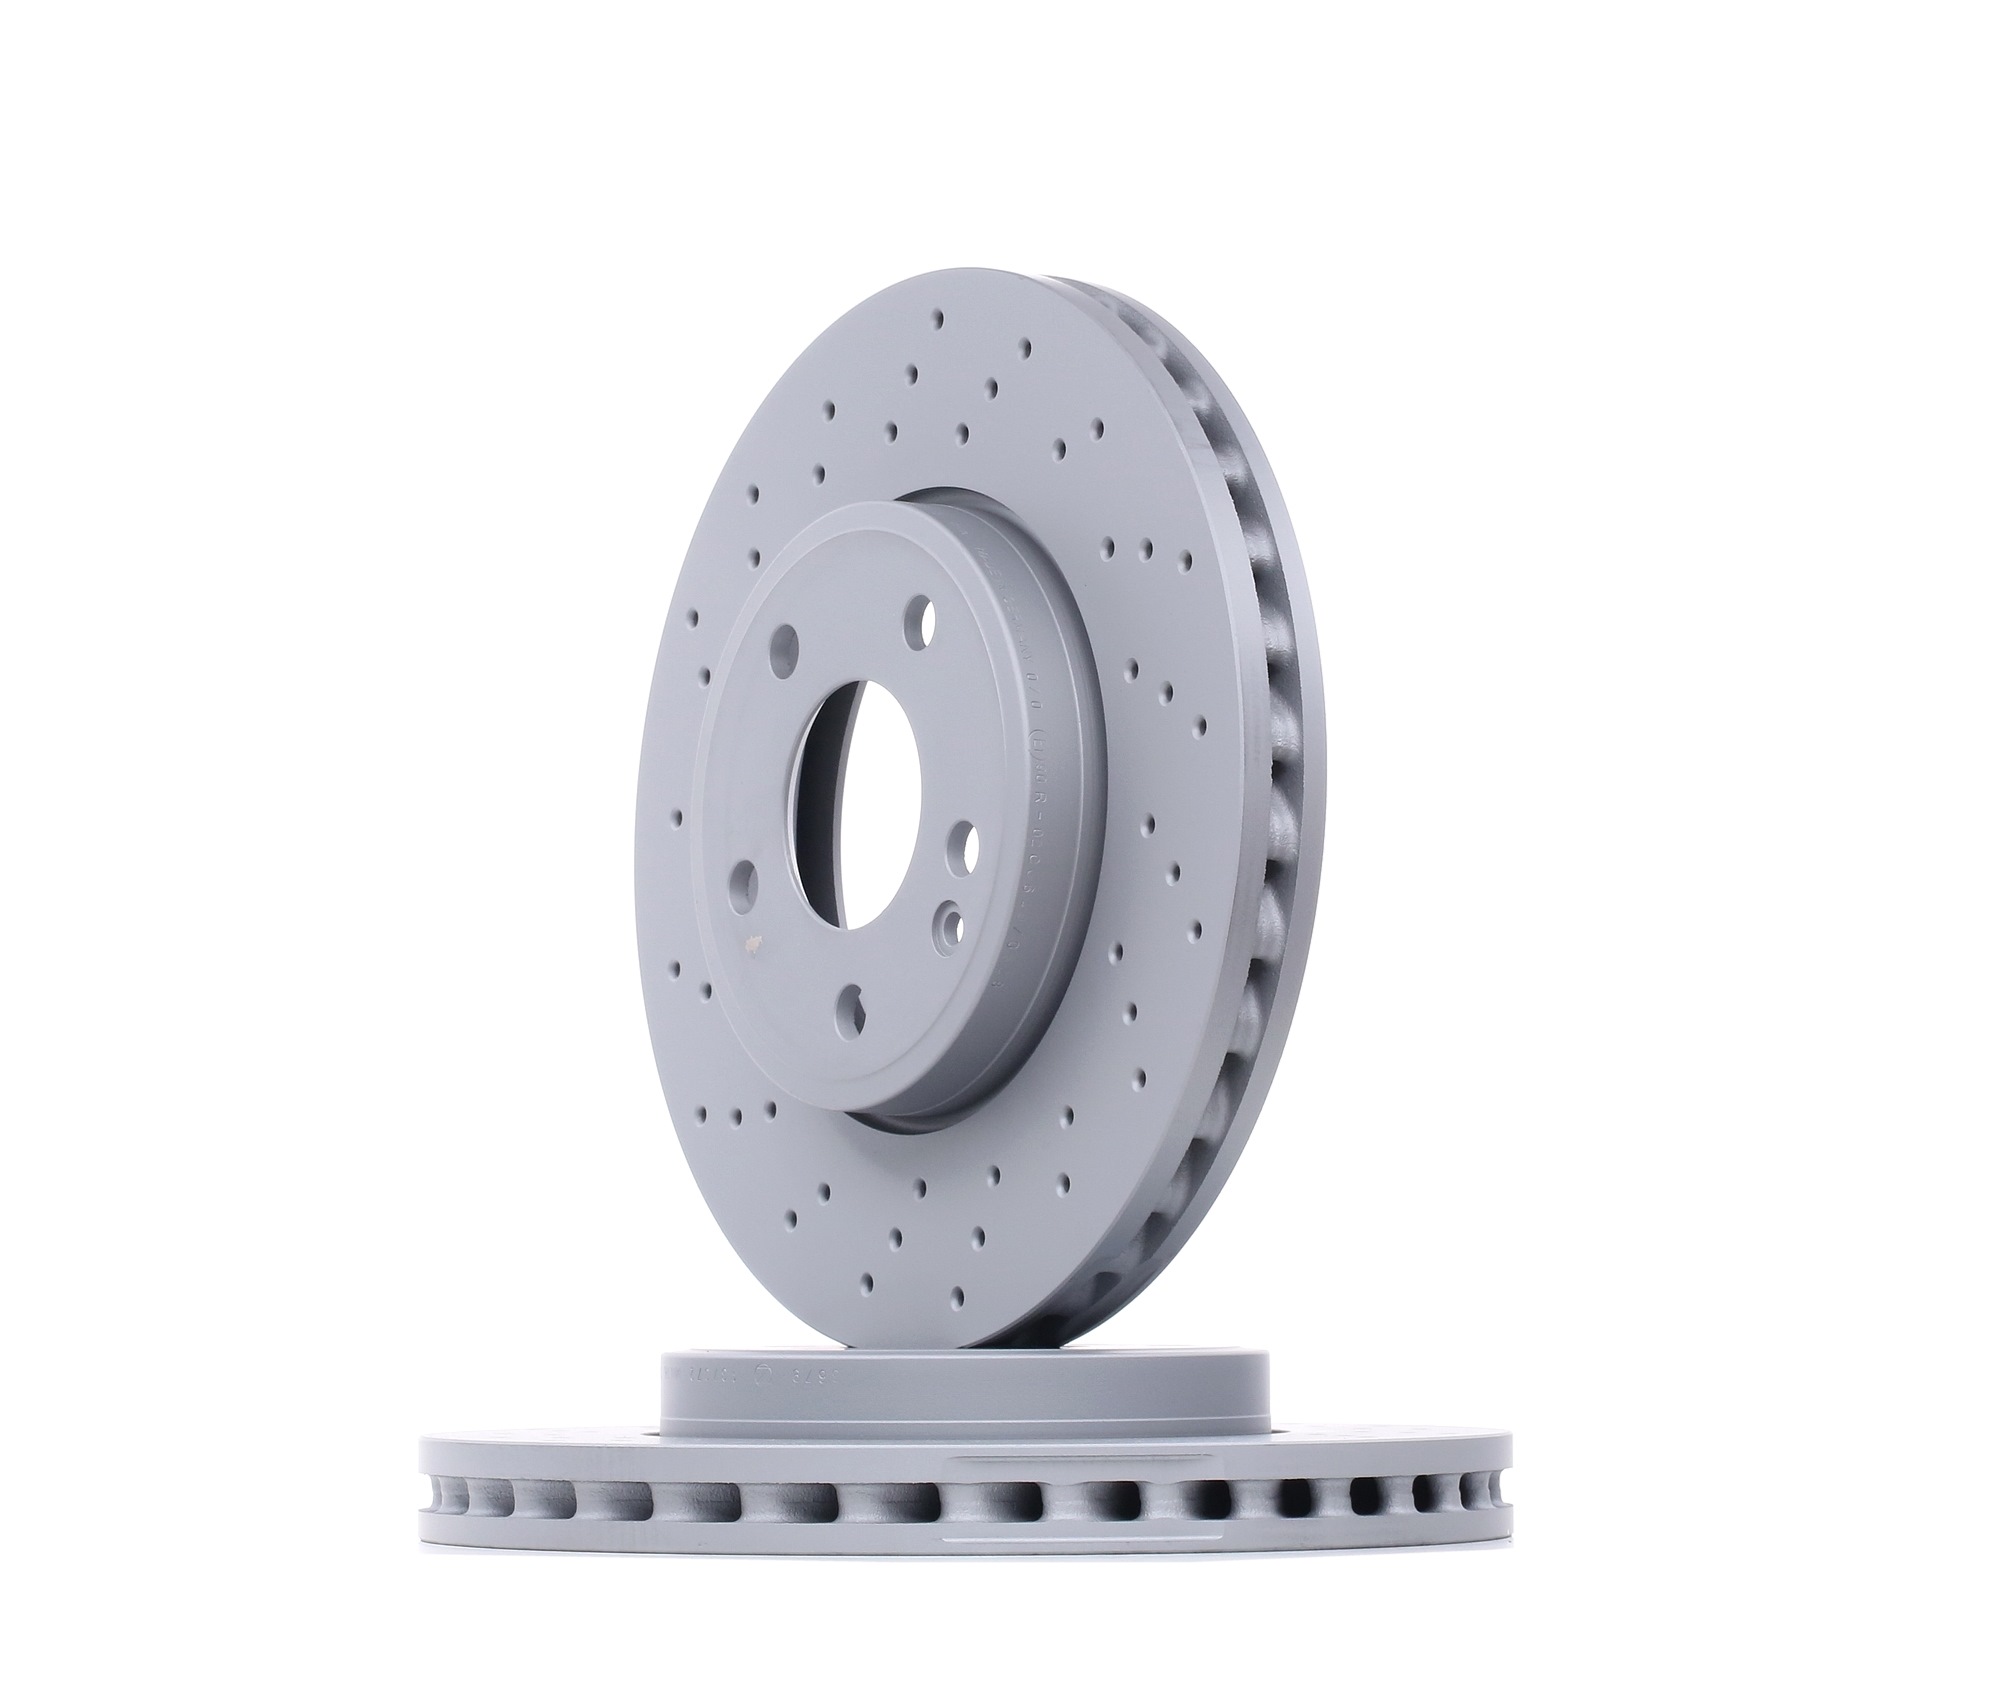 ZIMMERMANN COAT Z 400.3679.20 Brake disc 295x28mm, 6/5, 5x112, internally vented, Perforated, coated, High-carbon